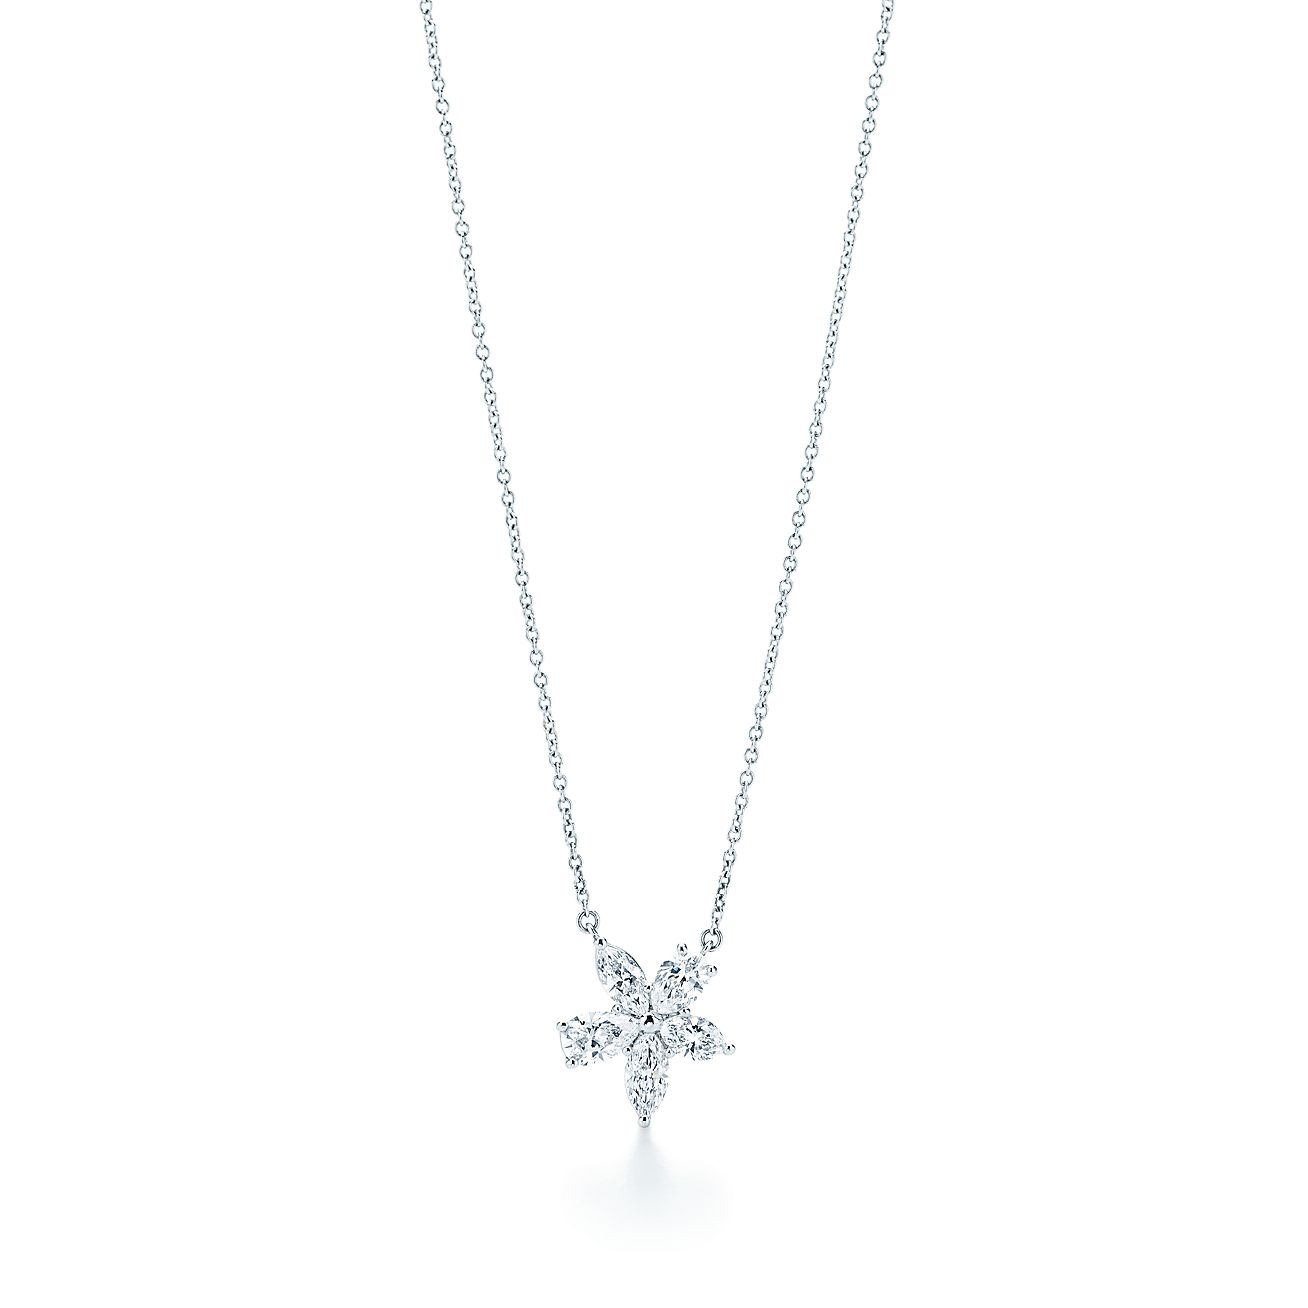 Tiffany Victoria™ mixed cluster pendant in platinum with diamonds, large. |  Tiffany & Co.